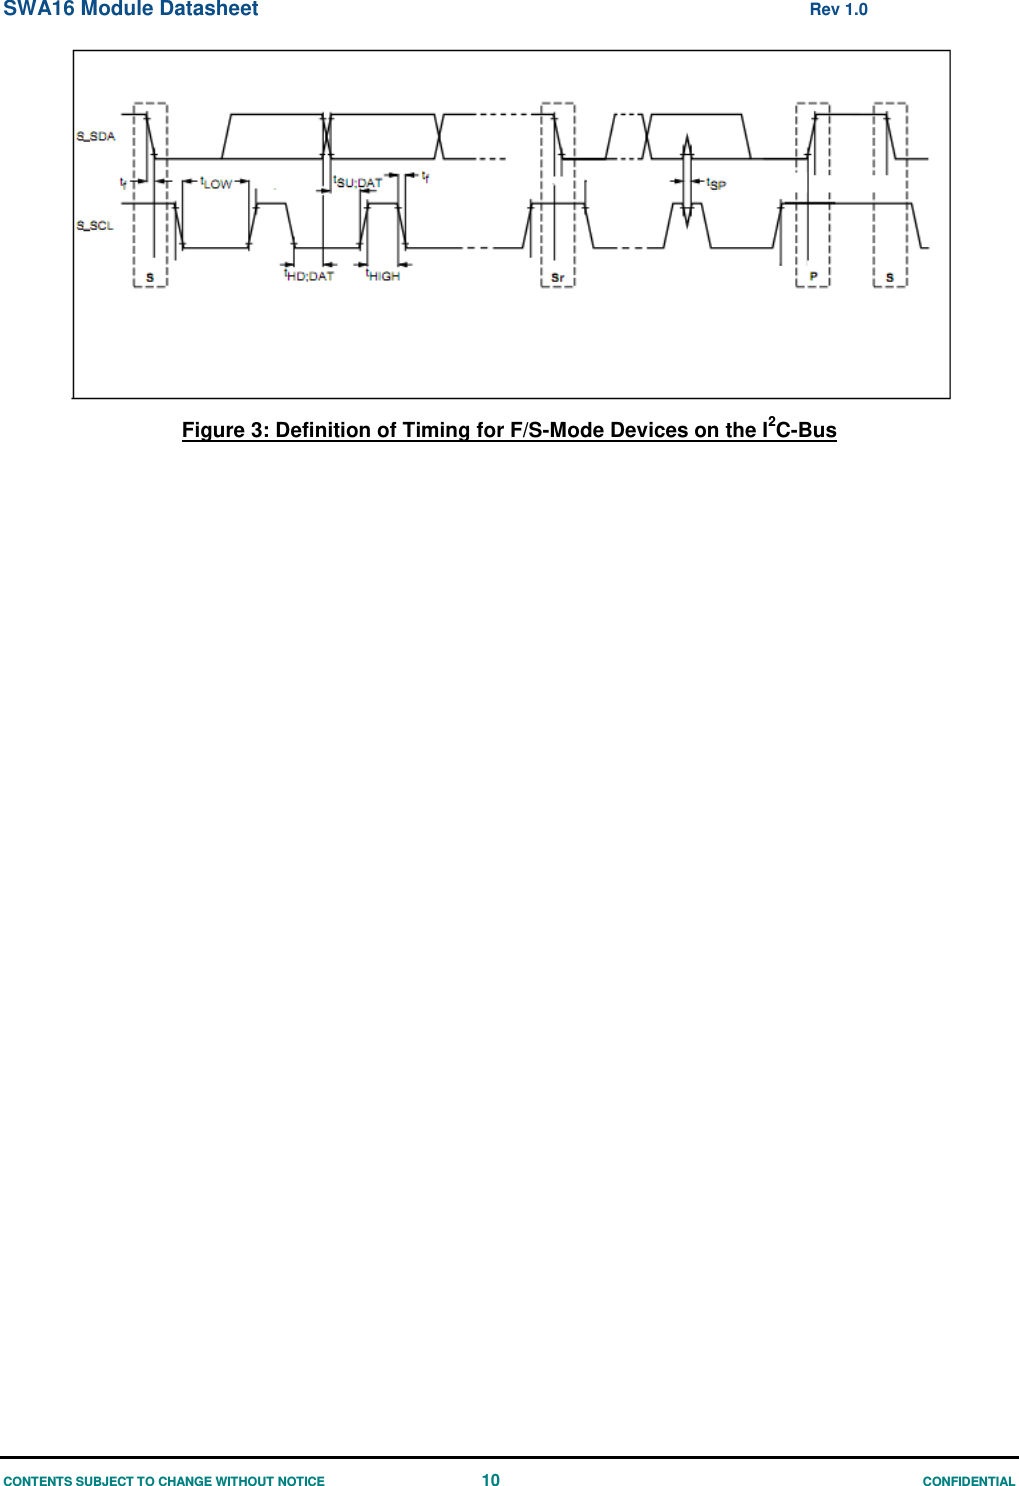 SWA16 Module Datasheet  Rev 1.0 CONTENTS SUBJECT TO CHANGE WITHOUT NOTICE  10 CONFIDENTIAL  Figure 3: Definition of Timing for F/S-Mode Devices on the I2C-Bus   